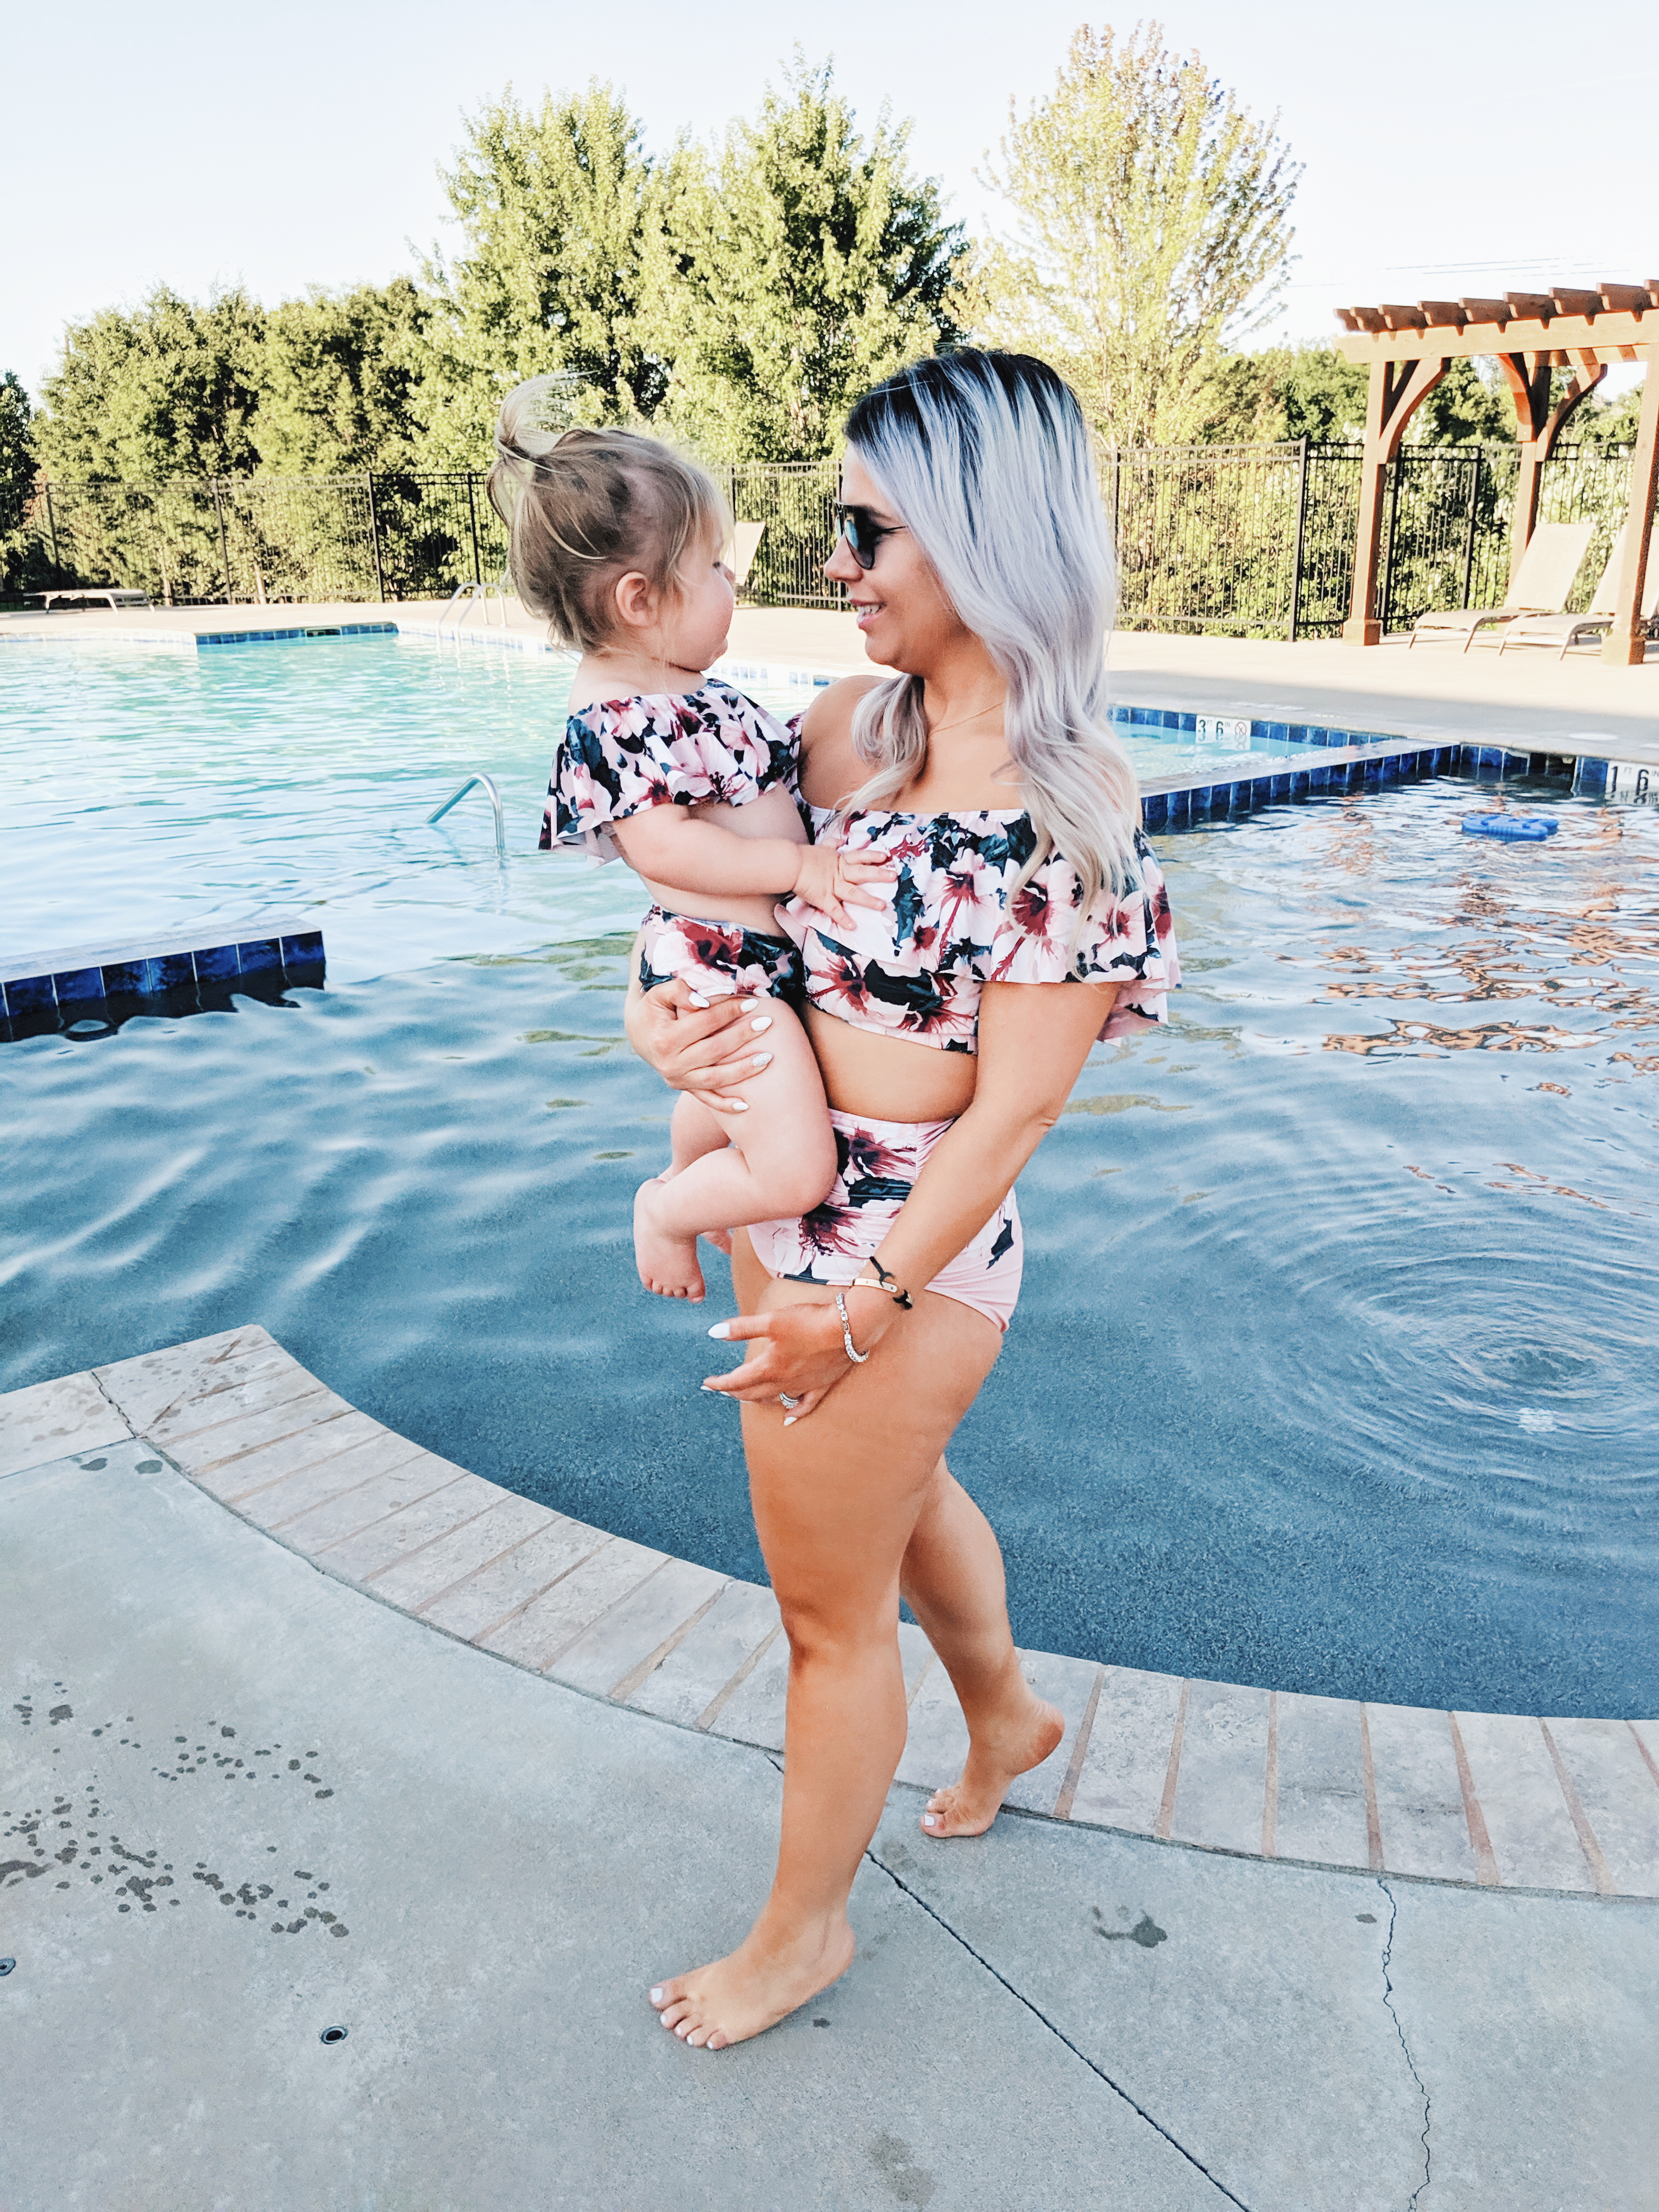 Loved this mama's honest Albion Fit swimsuit reviews! If you're debating if Albion Fit swimsuits are worth it, read this review of cute mommy and me swimsuits from Albion Fit! #mommyandme #twinning #girlmom 